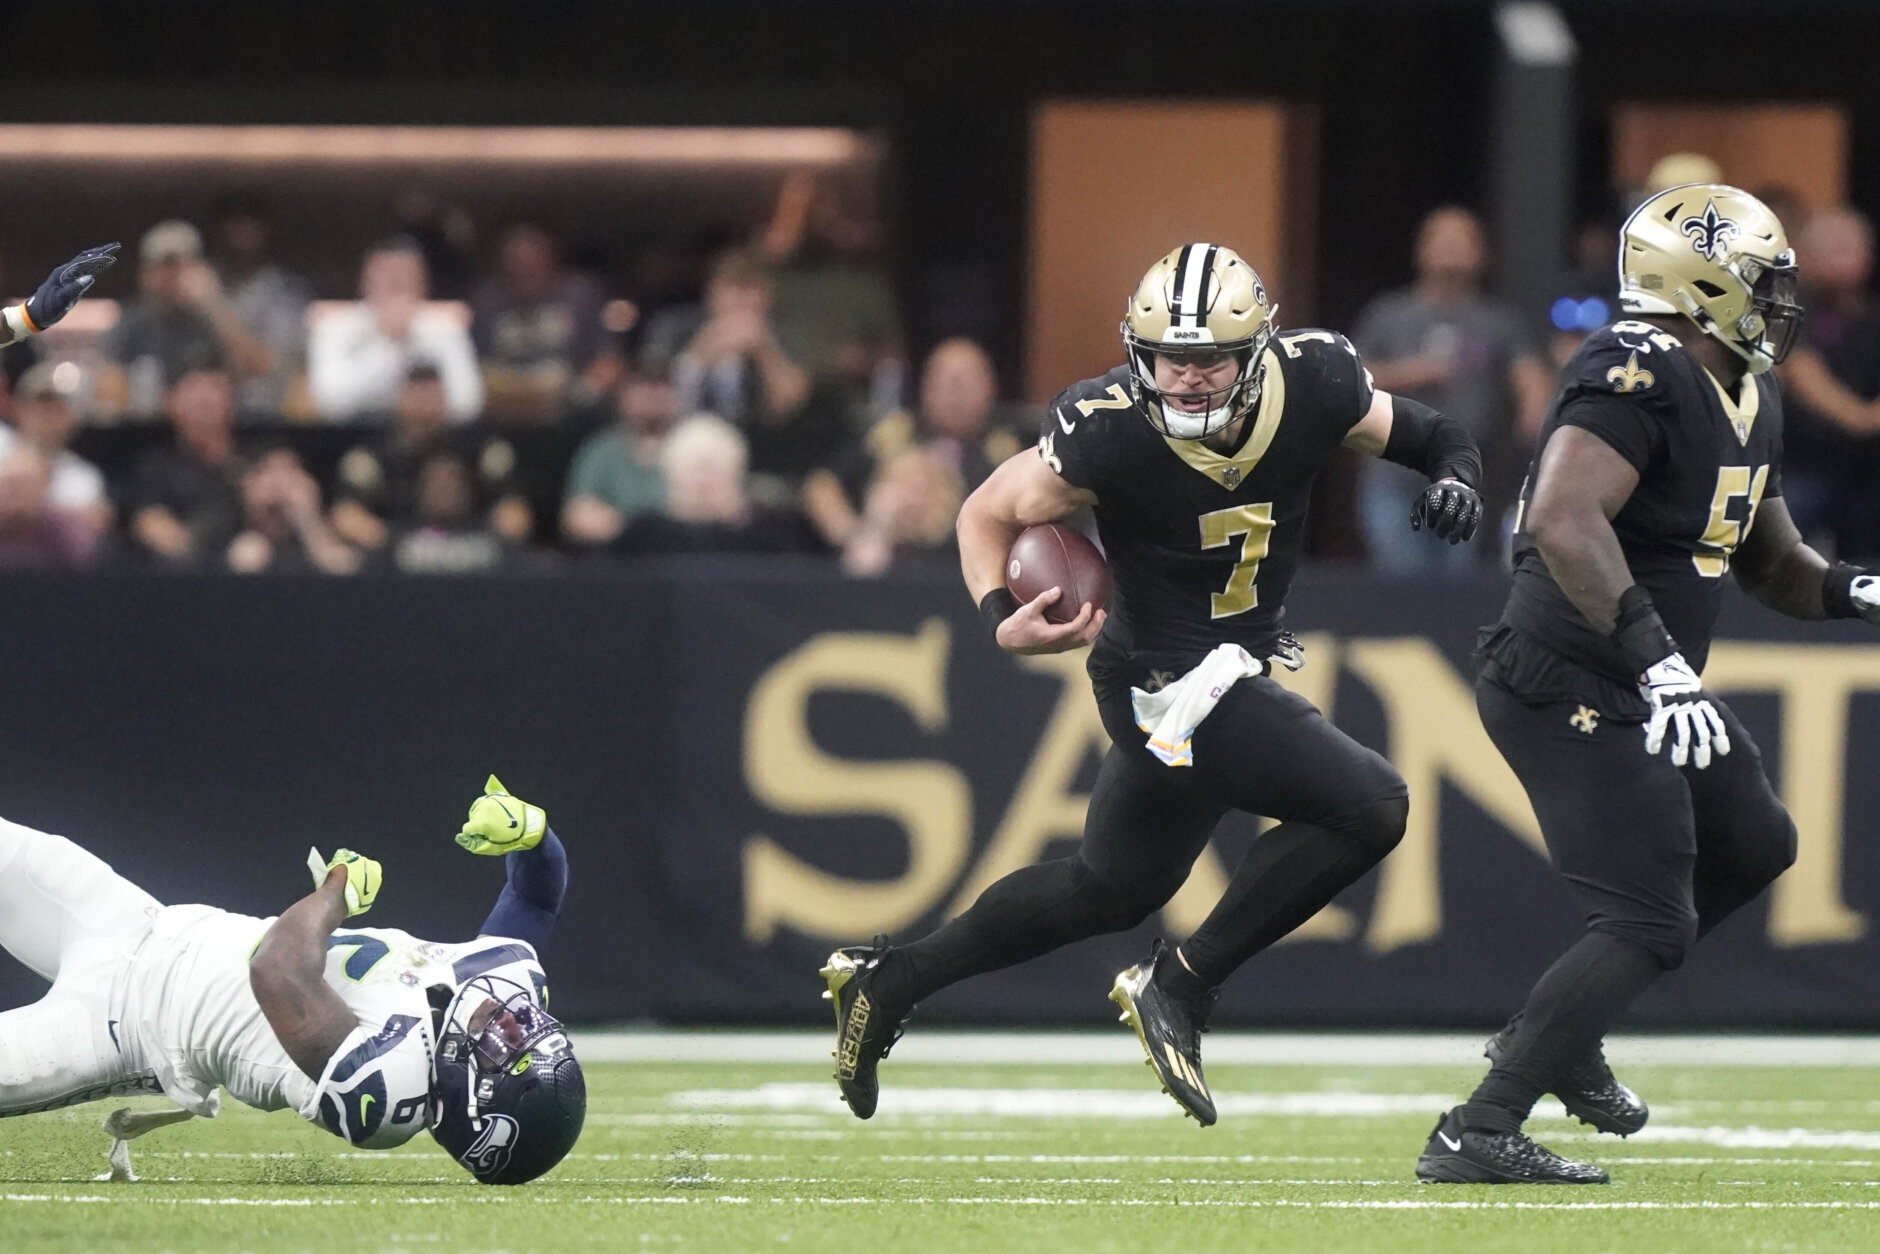 <p><em><strong>Seahawks 32</strong></em><br />
<em><strong>Saints 39</strong></em></p>
<p>Now <em>that&#8217;s</em> the way you use Taysom Hill. This might be the first good thing Dennis Allen has done as head coach in New Orleans.</p>
